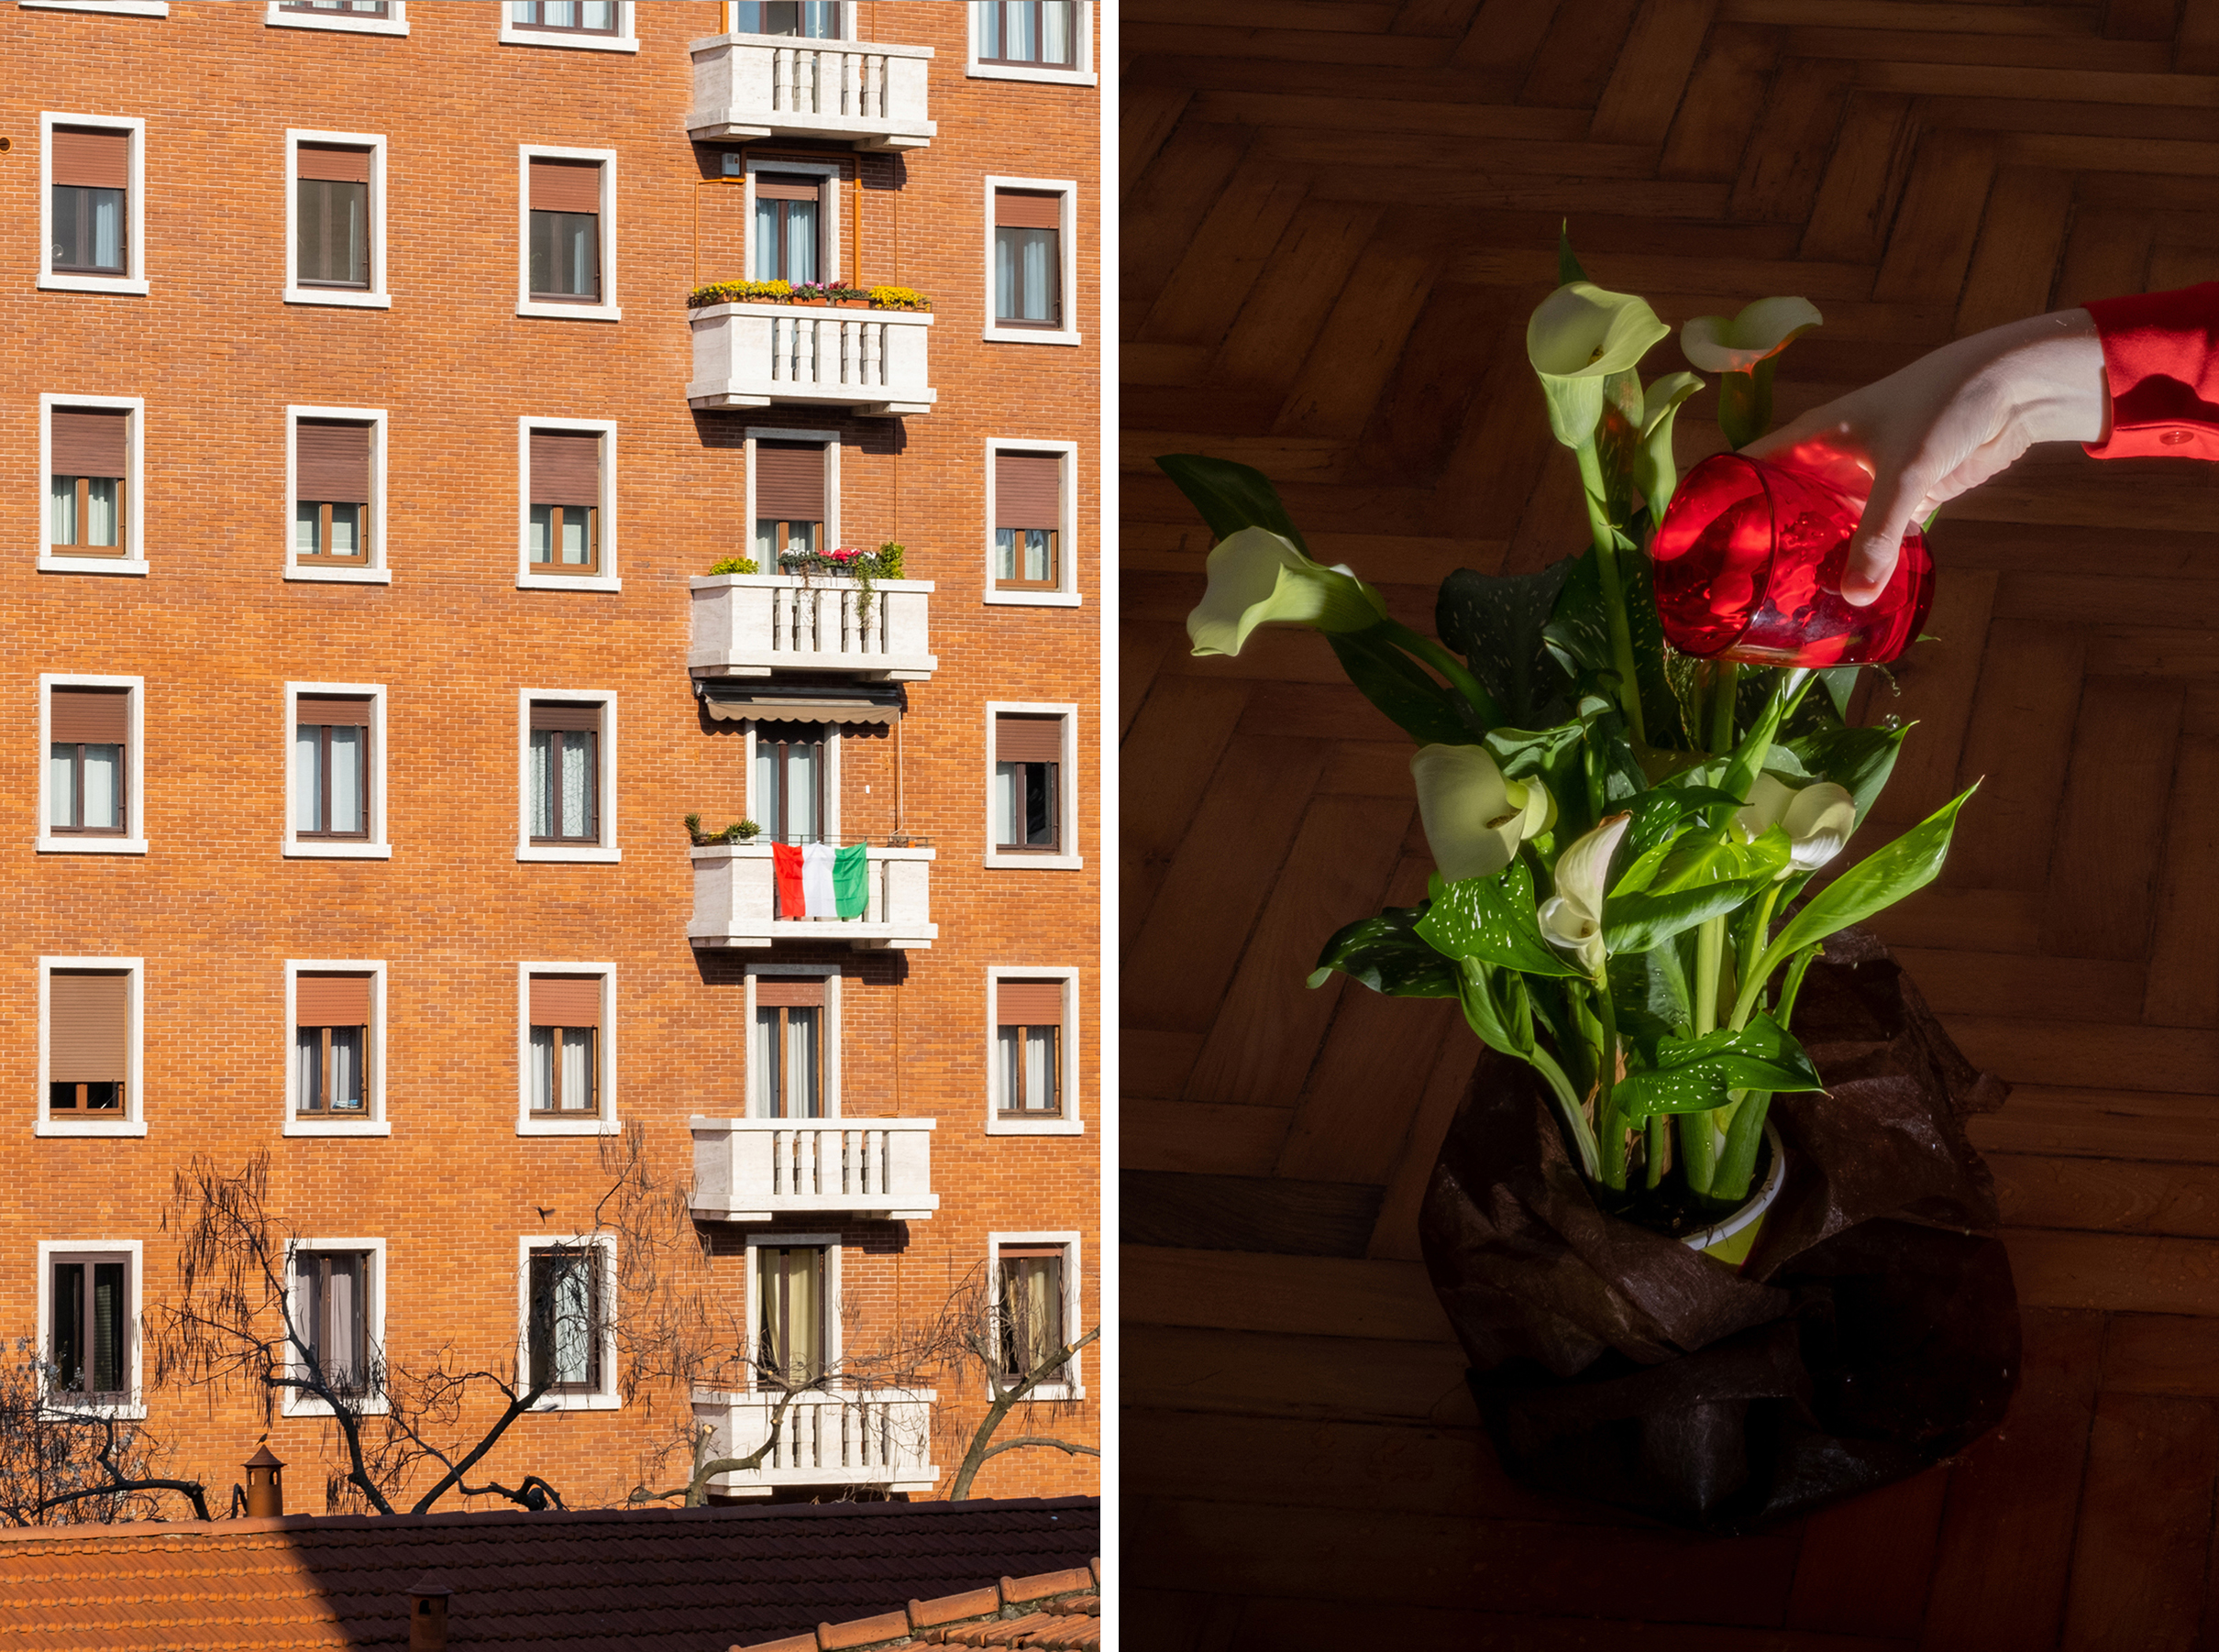 Left: 3:50 P.M. View from the balcony; Right: 3:40 P.M. Taking care of the plant (Lucia Buricelli for TIME)